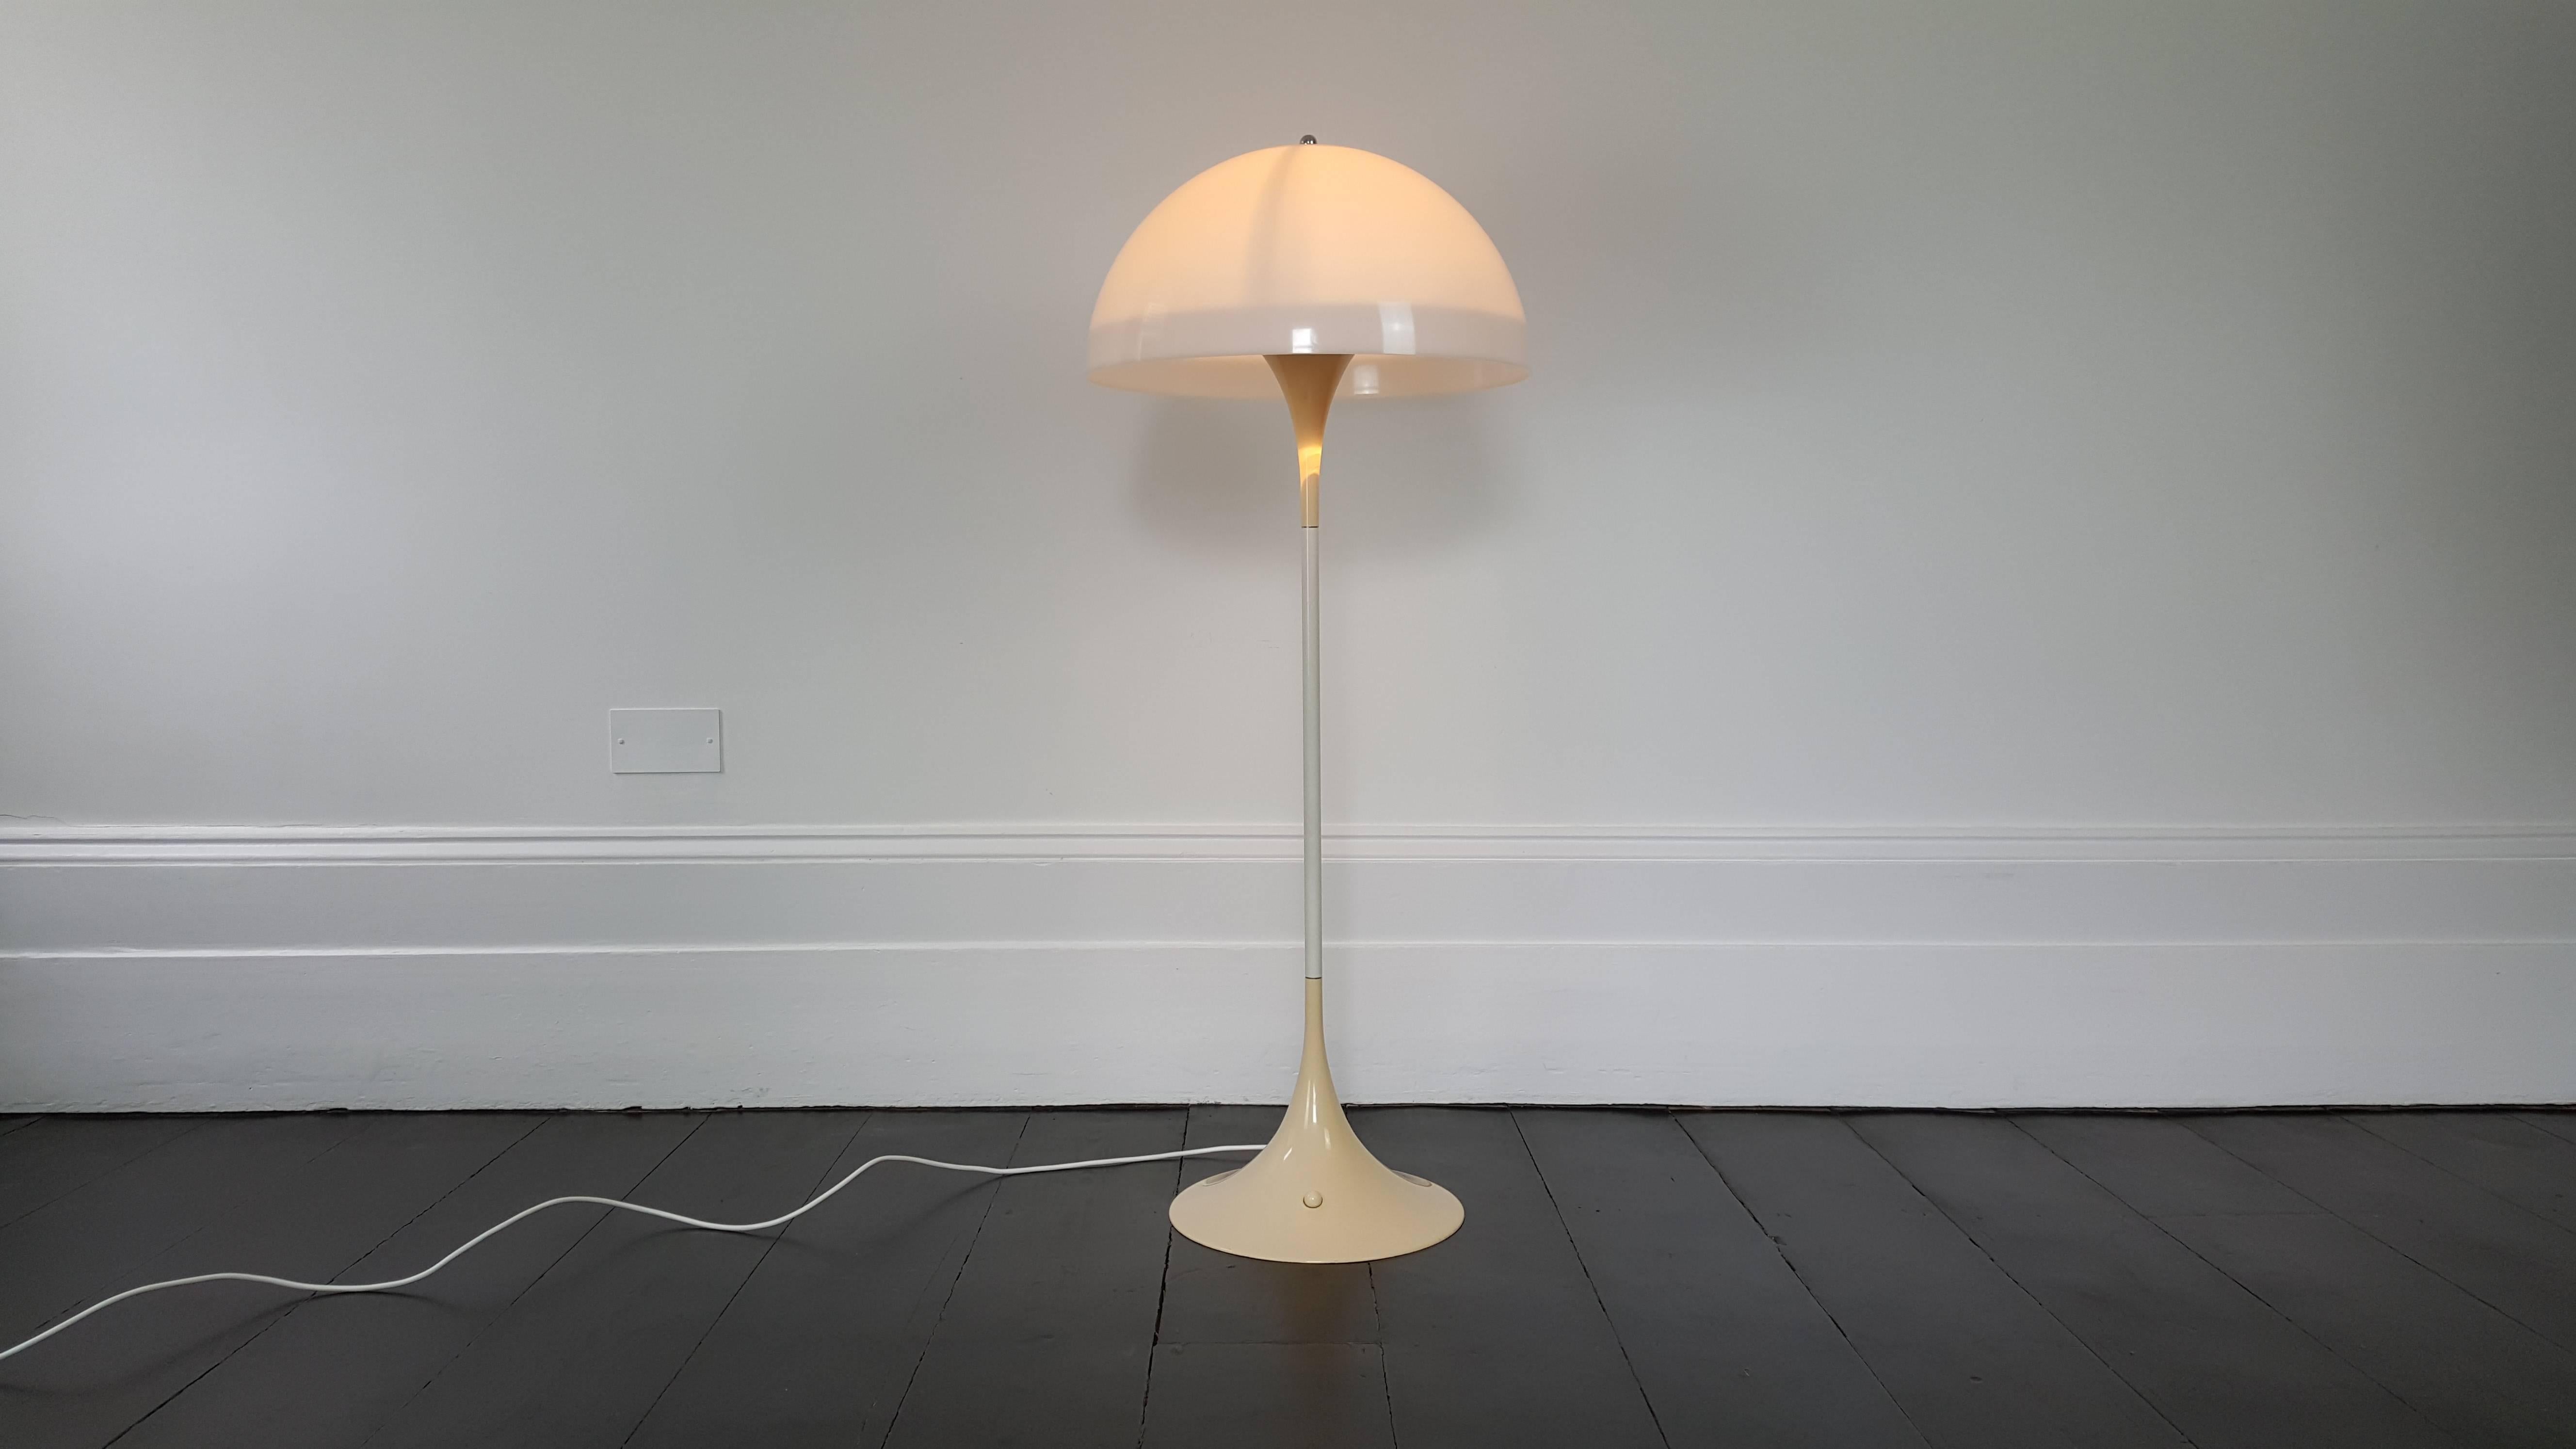 Original vintage Panthella floor lamp designed by Verner Panton 1971 for Louis Poulsen

The famous Panthella floor lamp was designed by Verner Panton in 1971 and manufactured by Louis Poulsen.
 
Consisting of a moulded acrylic dome shade and